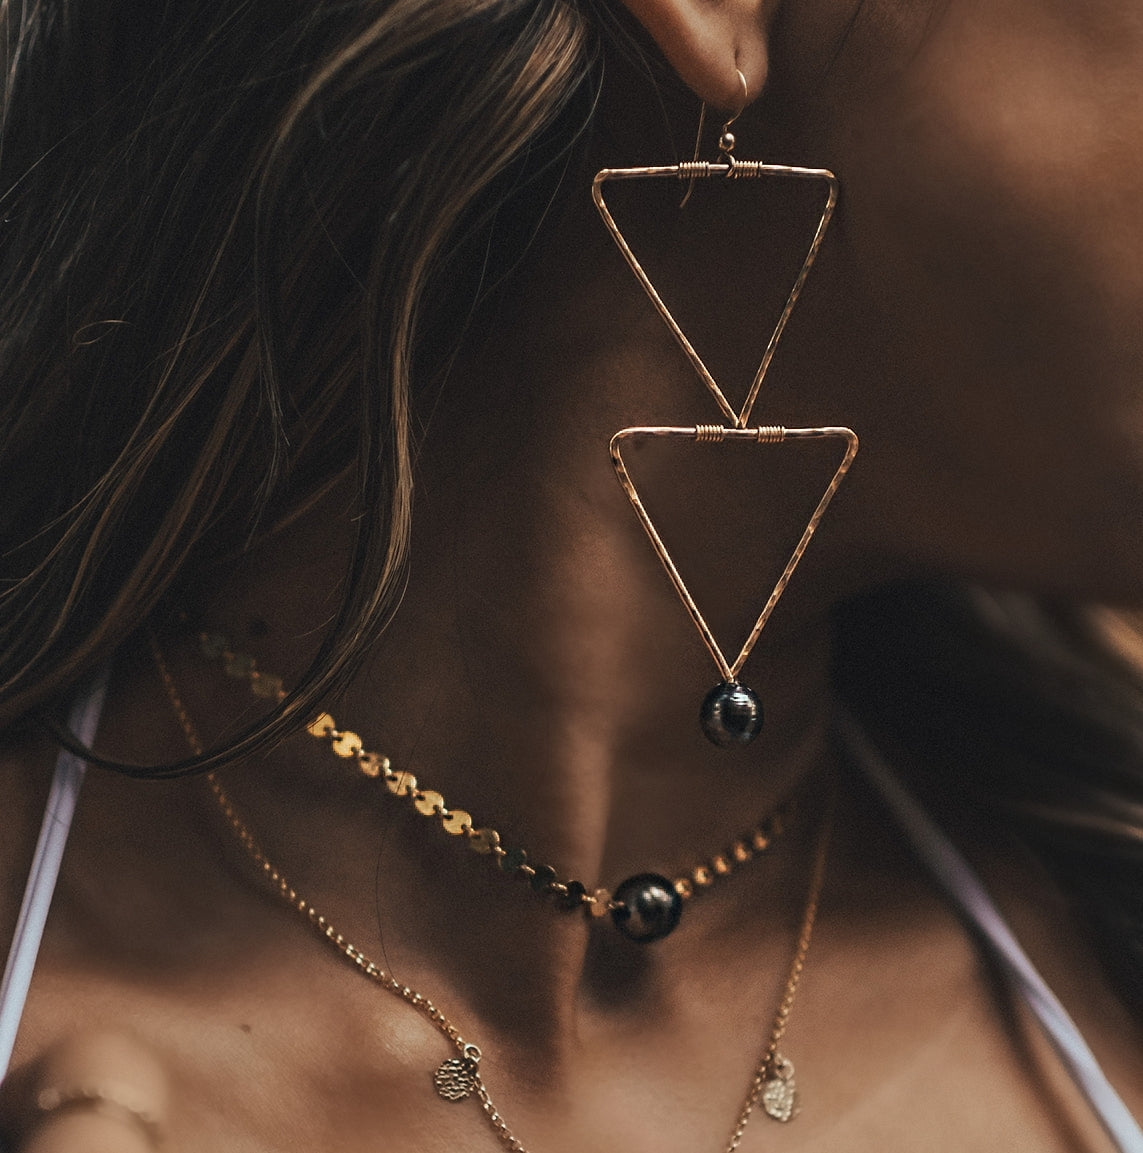 To The Summit Earrings.